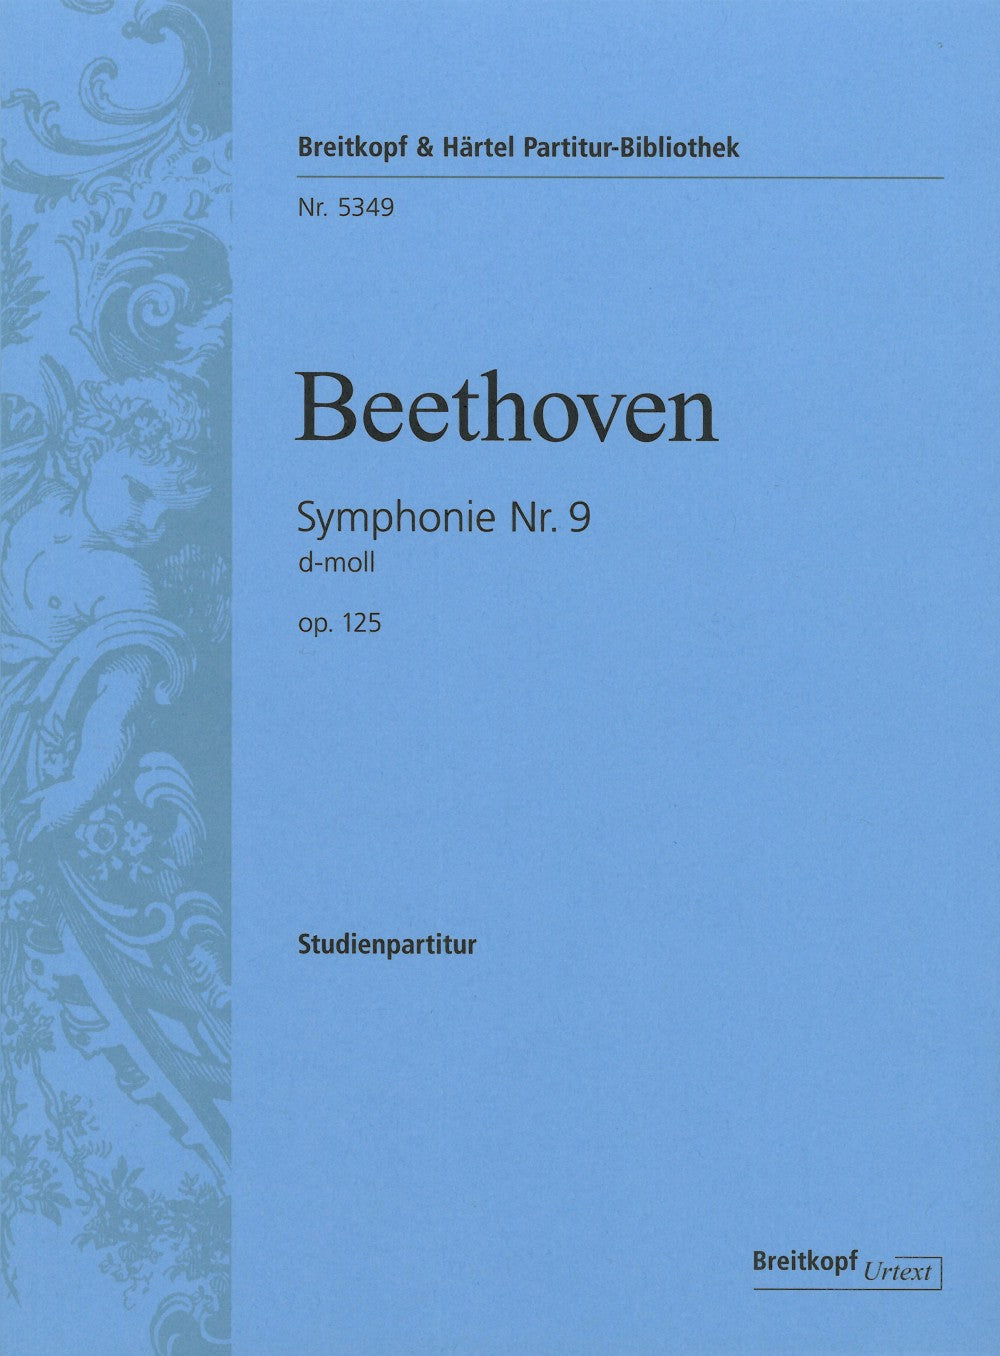 Beethoven Symphony No 8 in F major Opus 93